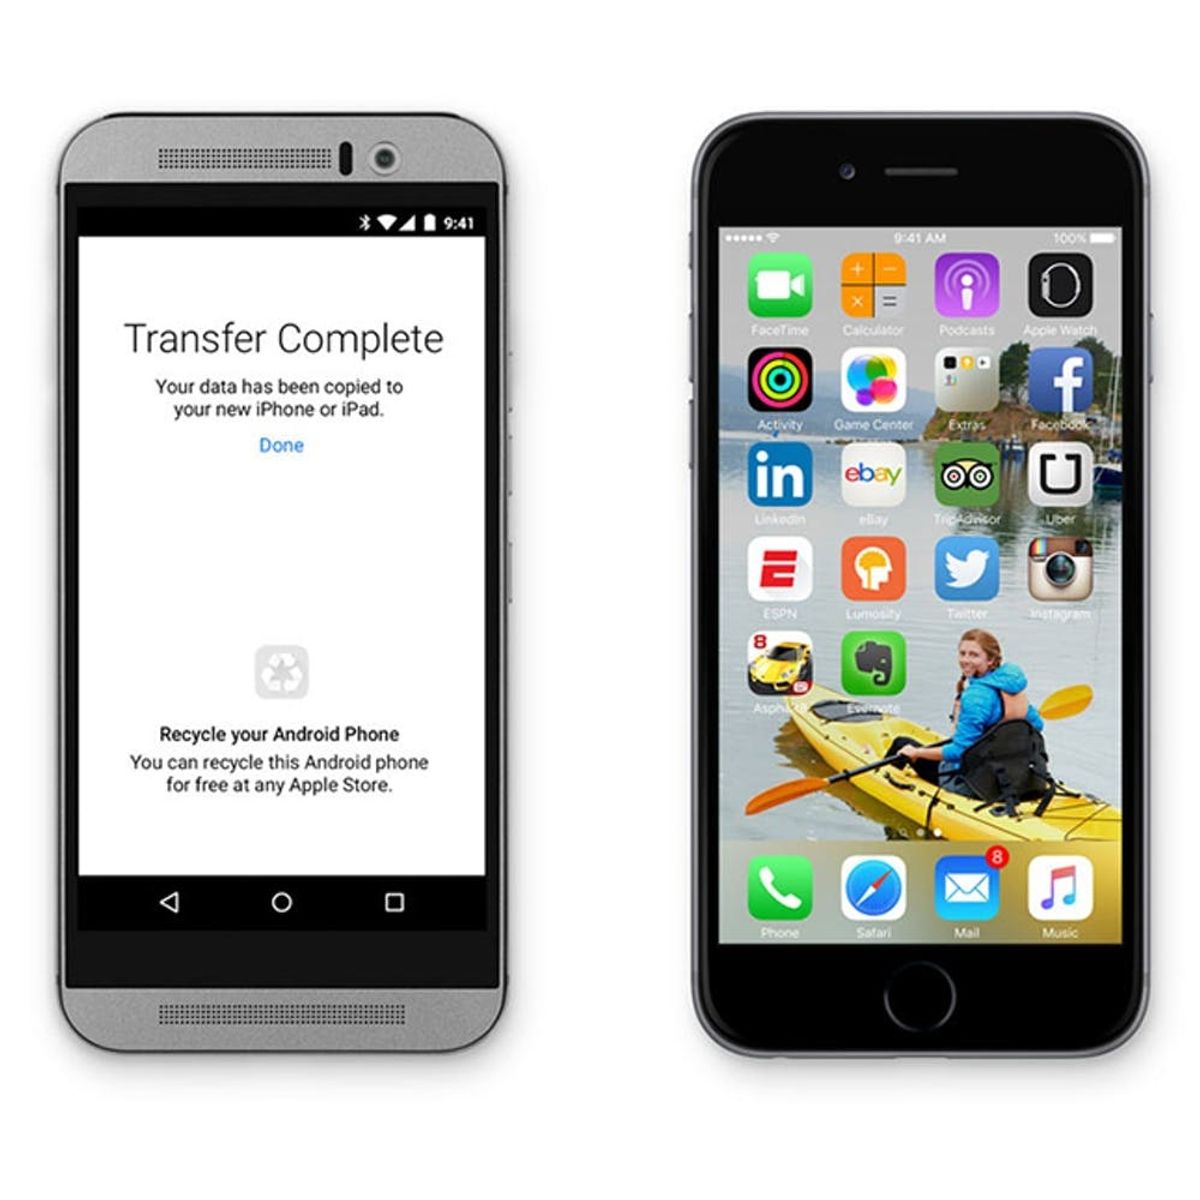 Apple’s Just-Announced App Is Going to Make Leaving Android Insanely Easy